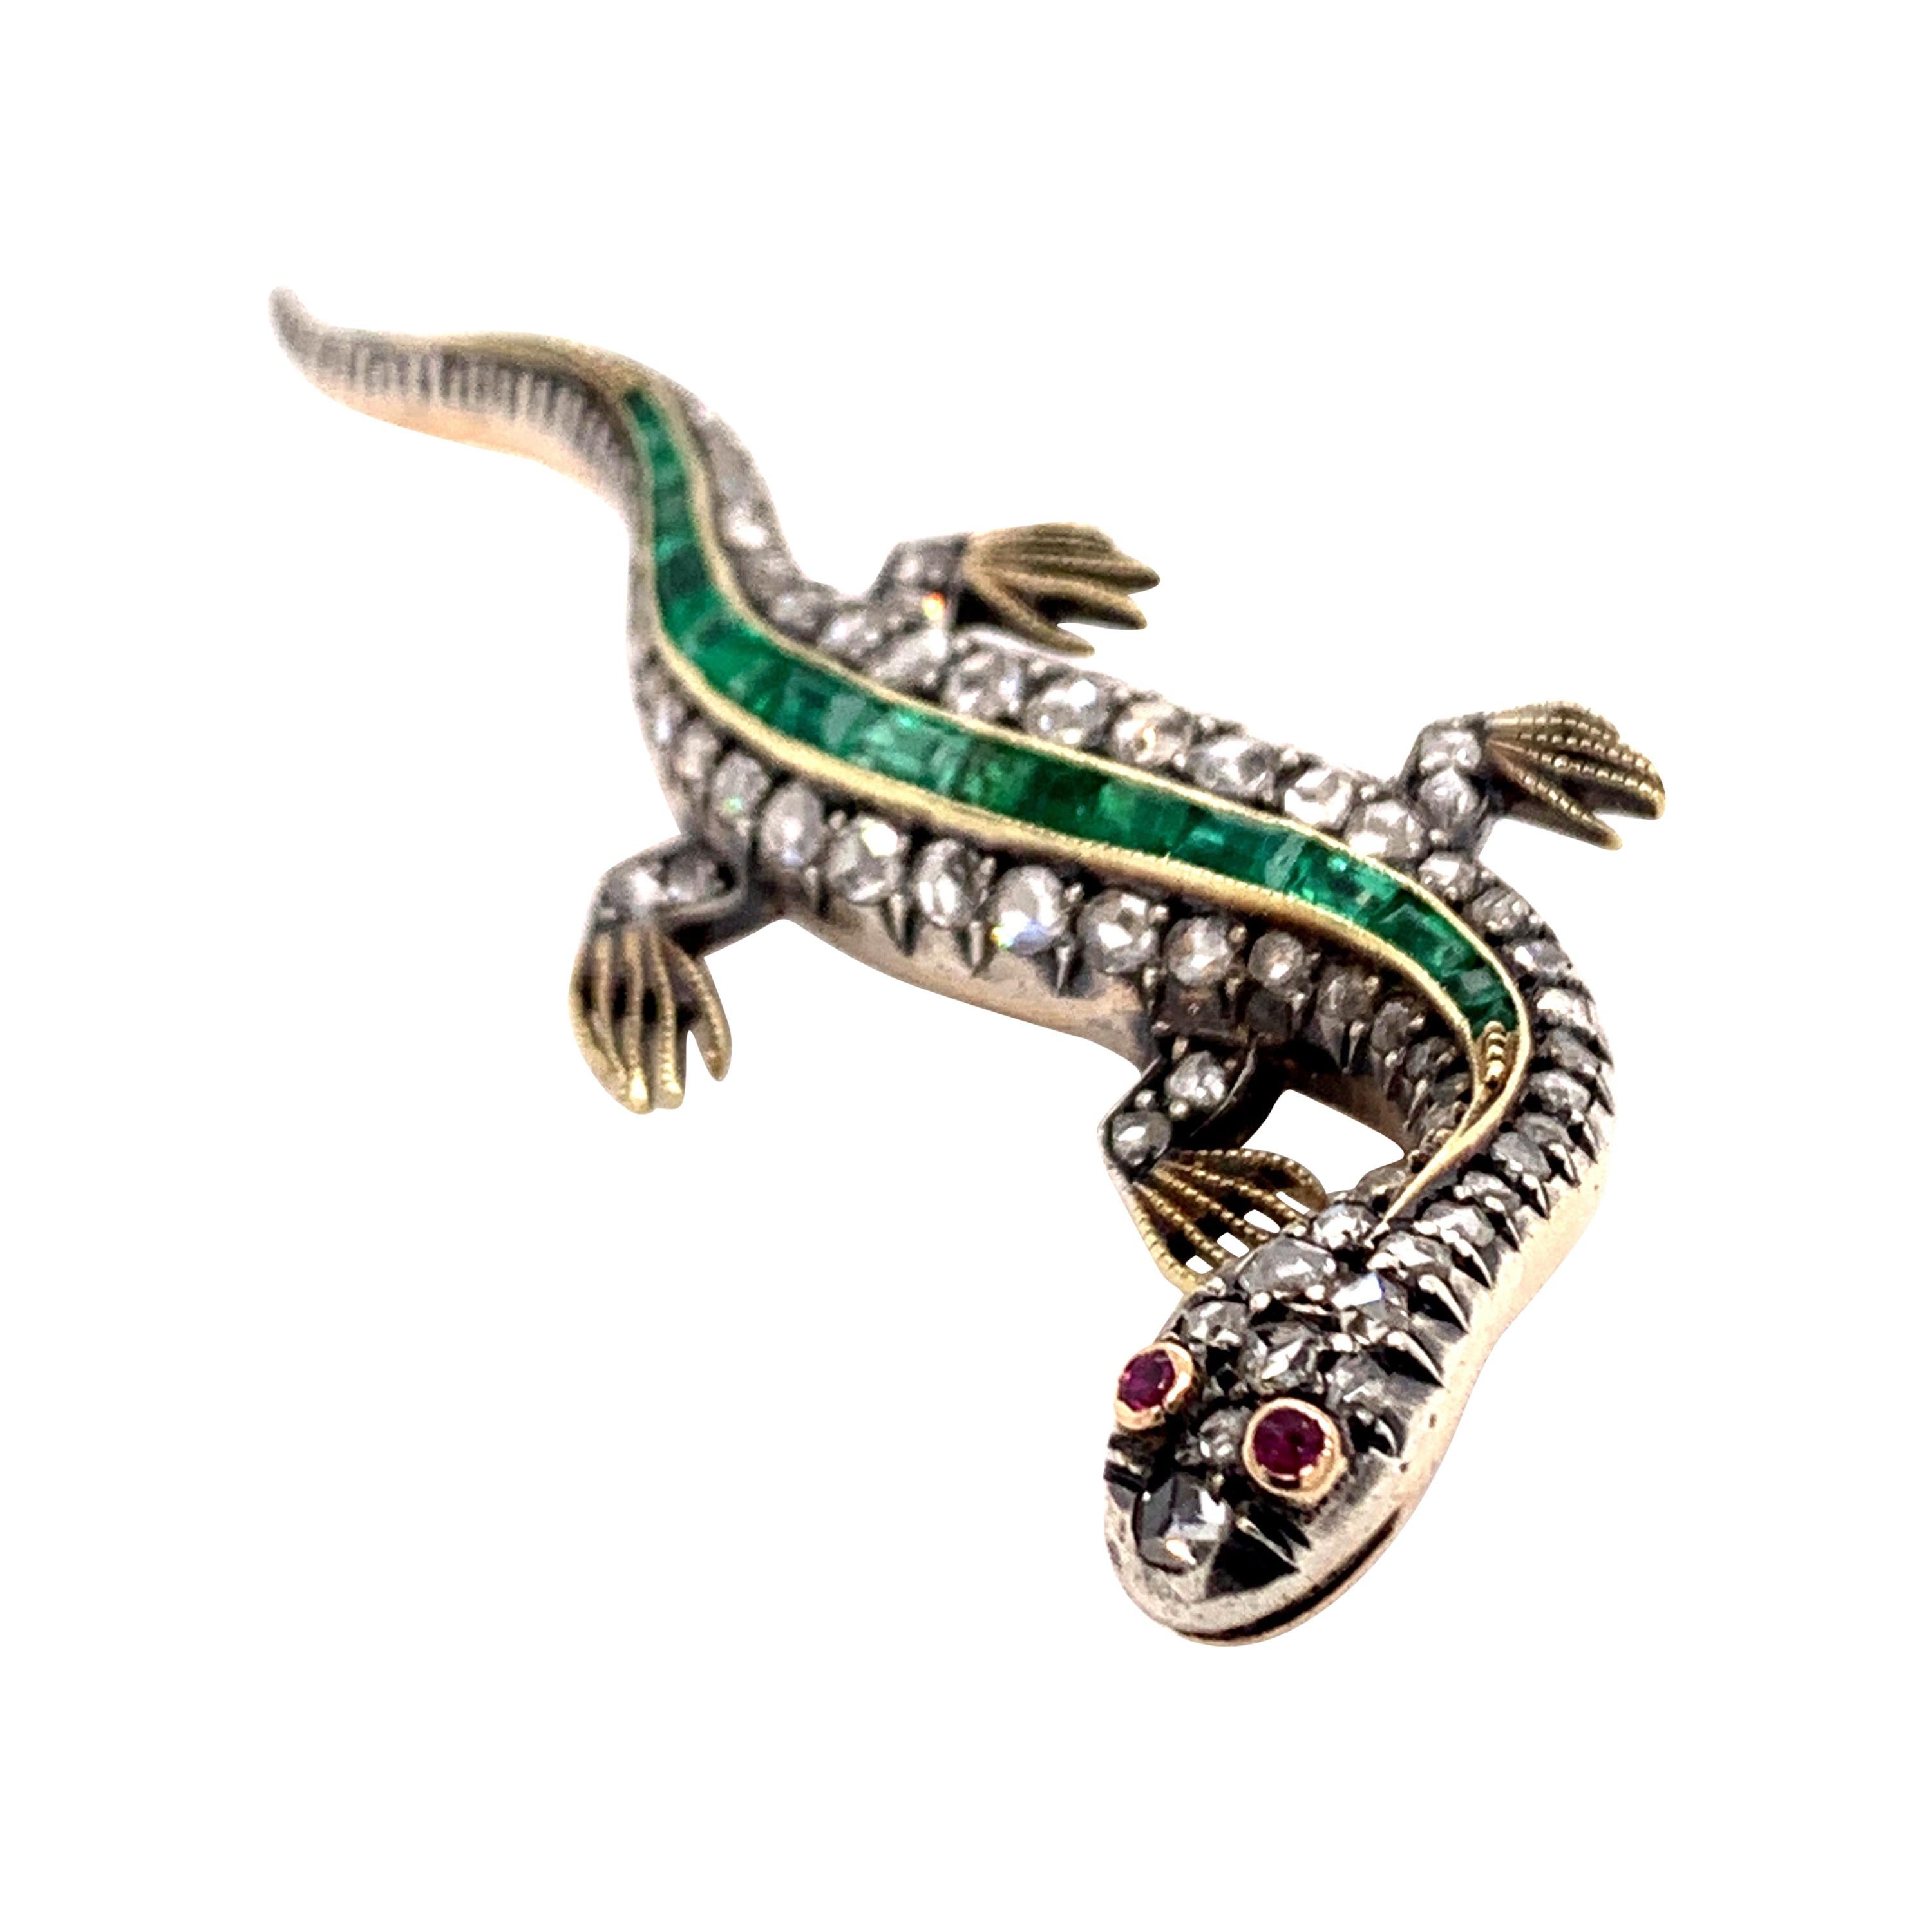 Victorian Silver and Gold Lizard Pin